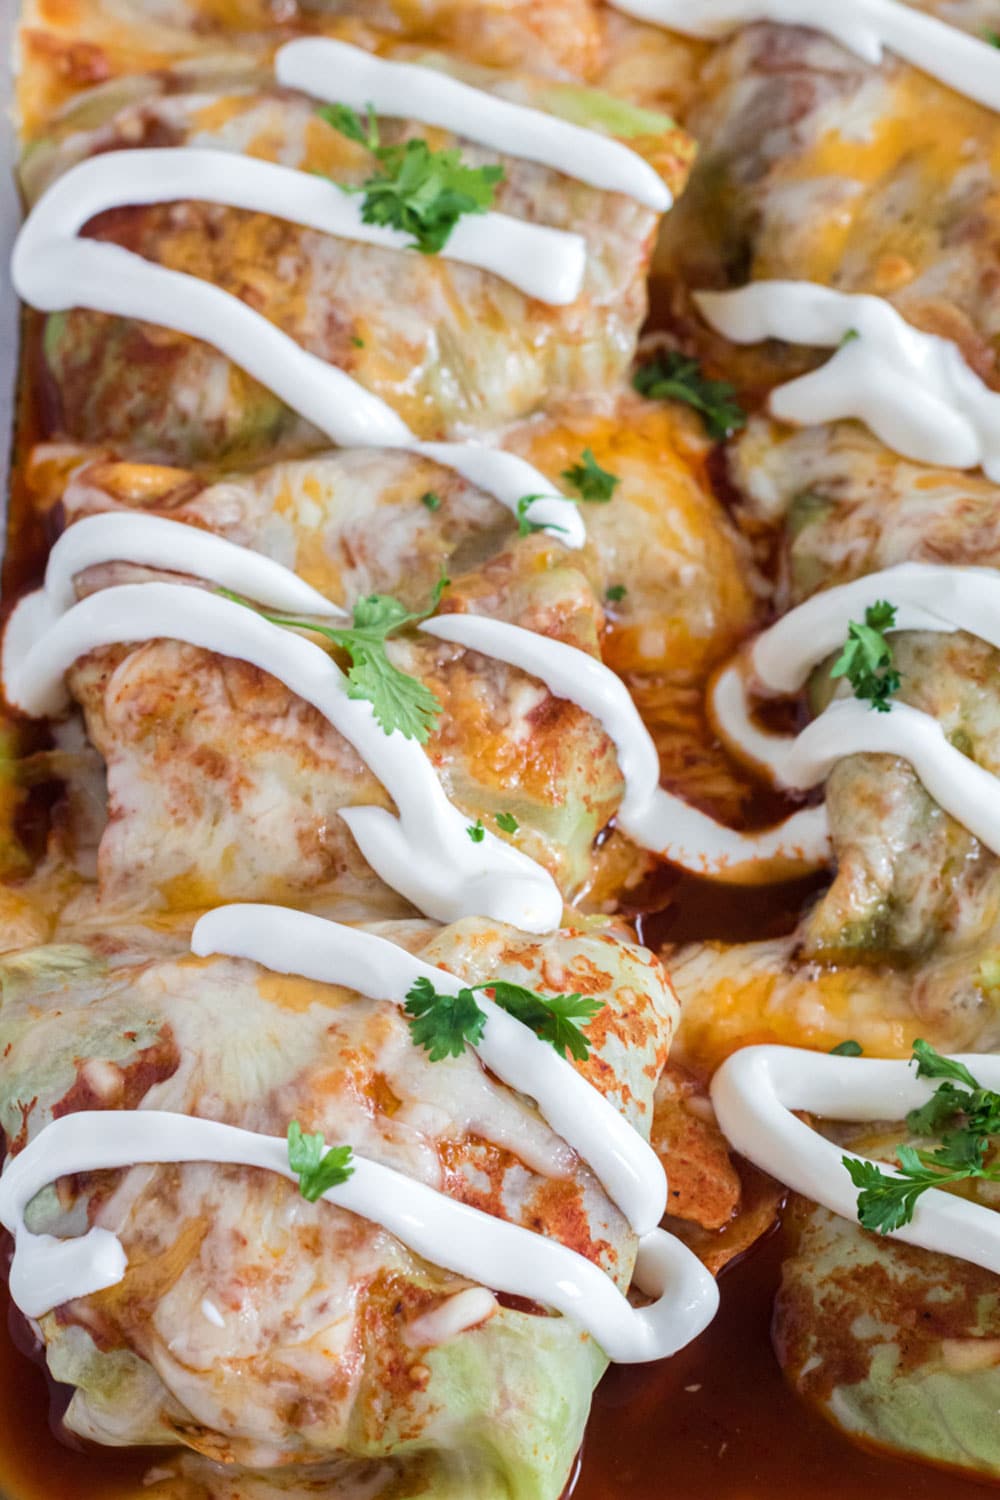 Pan of Mexican cabbage rolls garnished with sour cream and cilantro.